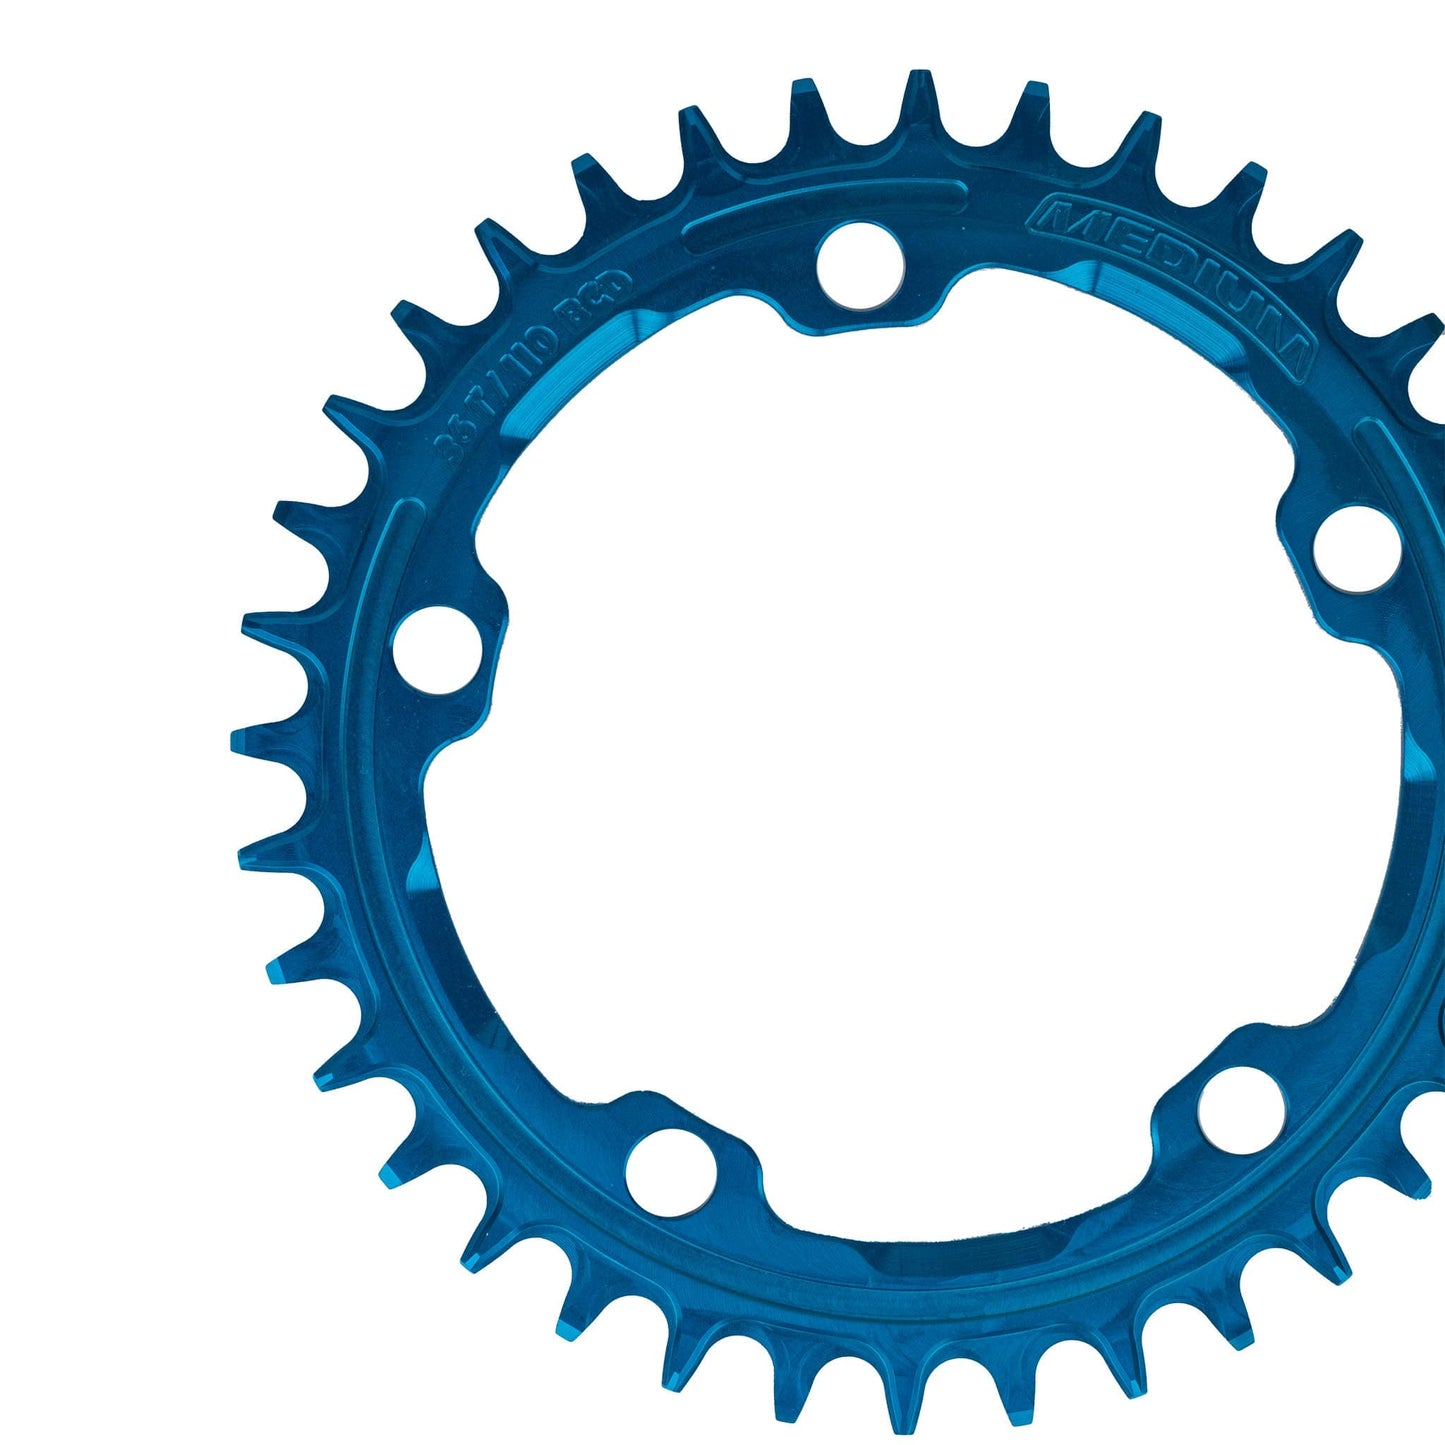 Narrow Wide 110 BCD // 36T 5-Bolt Chainring